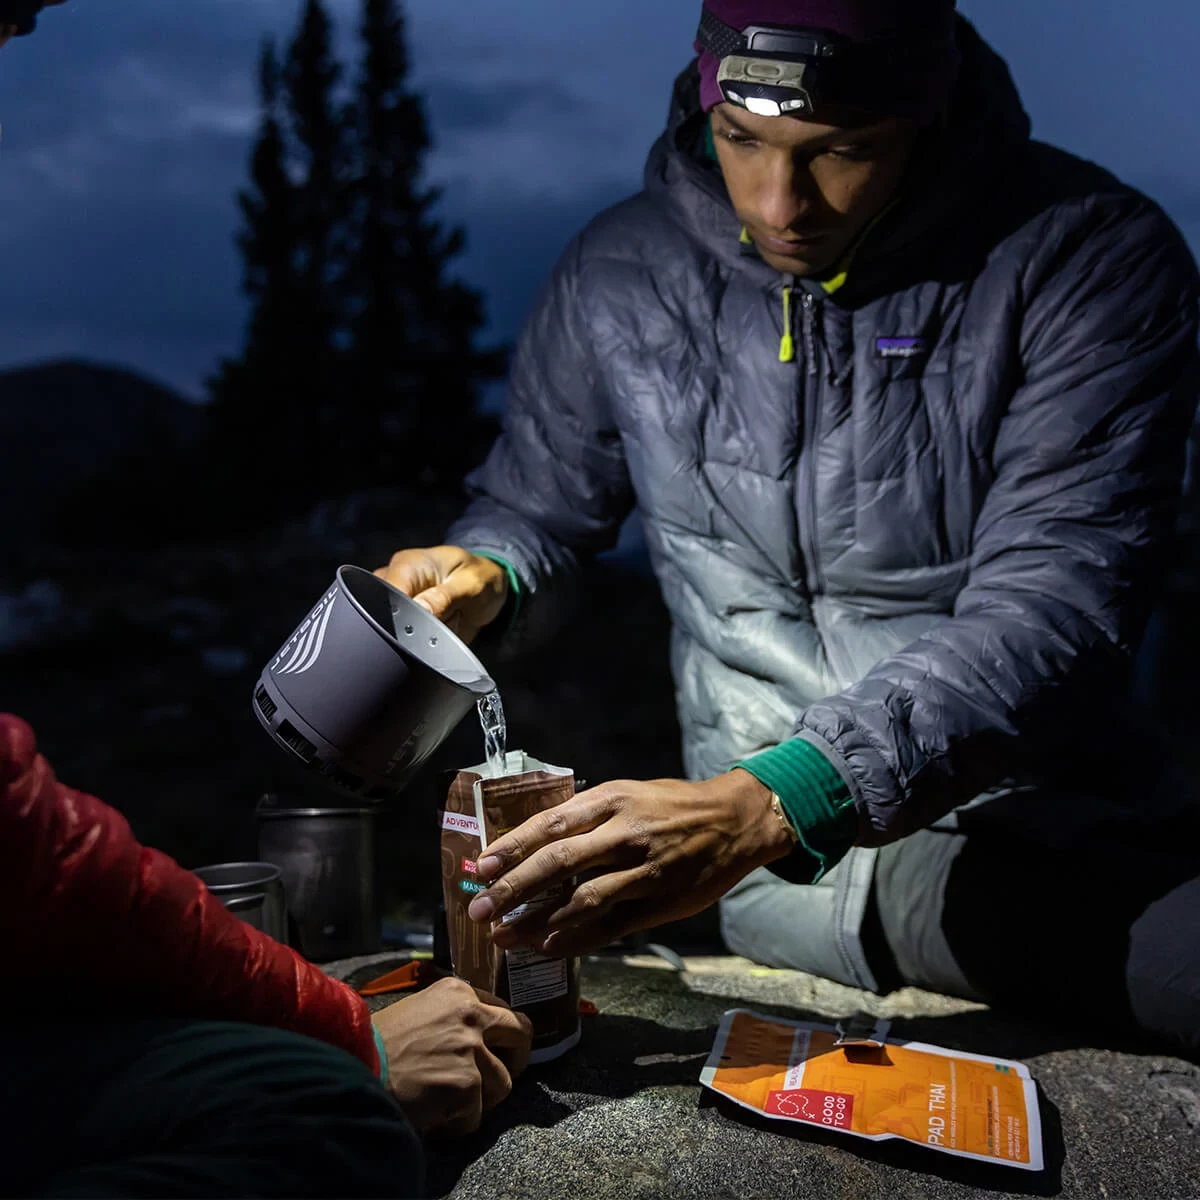 Preparing a Good To-Go meal with boiled water from the Stash at night